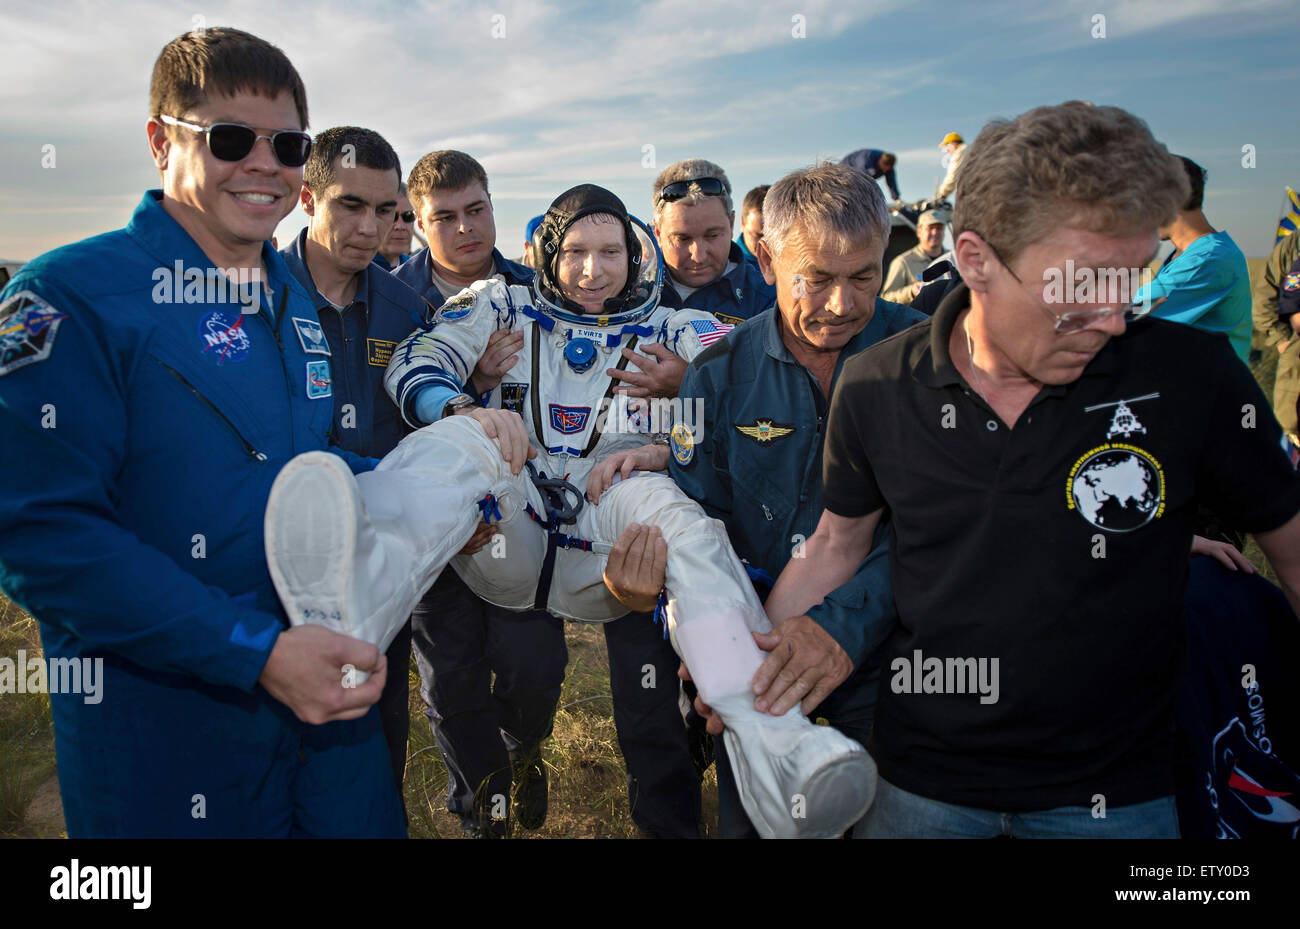 International Space Station Expedition 43 crew member American Terry Virts of NASA is carried to the medical tent moments after landing in a remote area in the Soyuz TMA-15M spacecraft June 11, 2015 near Zhezkazgan, Kazakhstan. The crew is returning after more than six months onboard the International Space Station. Stock Photo